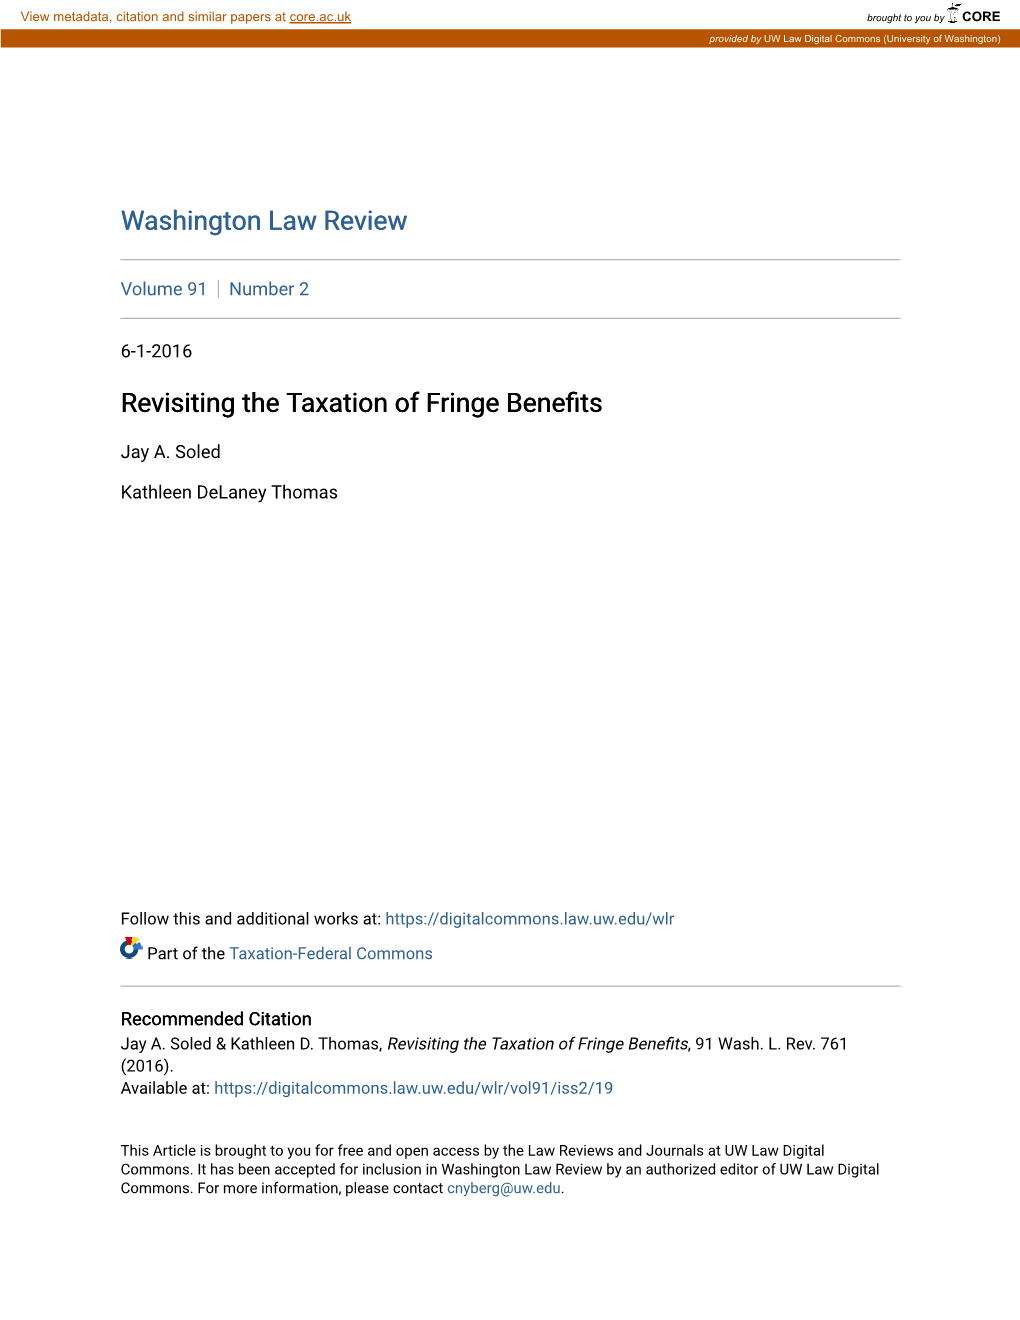 Revisiting the Taxation of Fringe Benefits